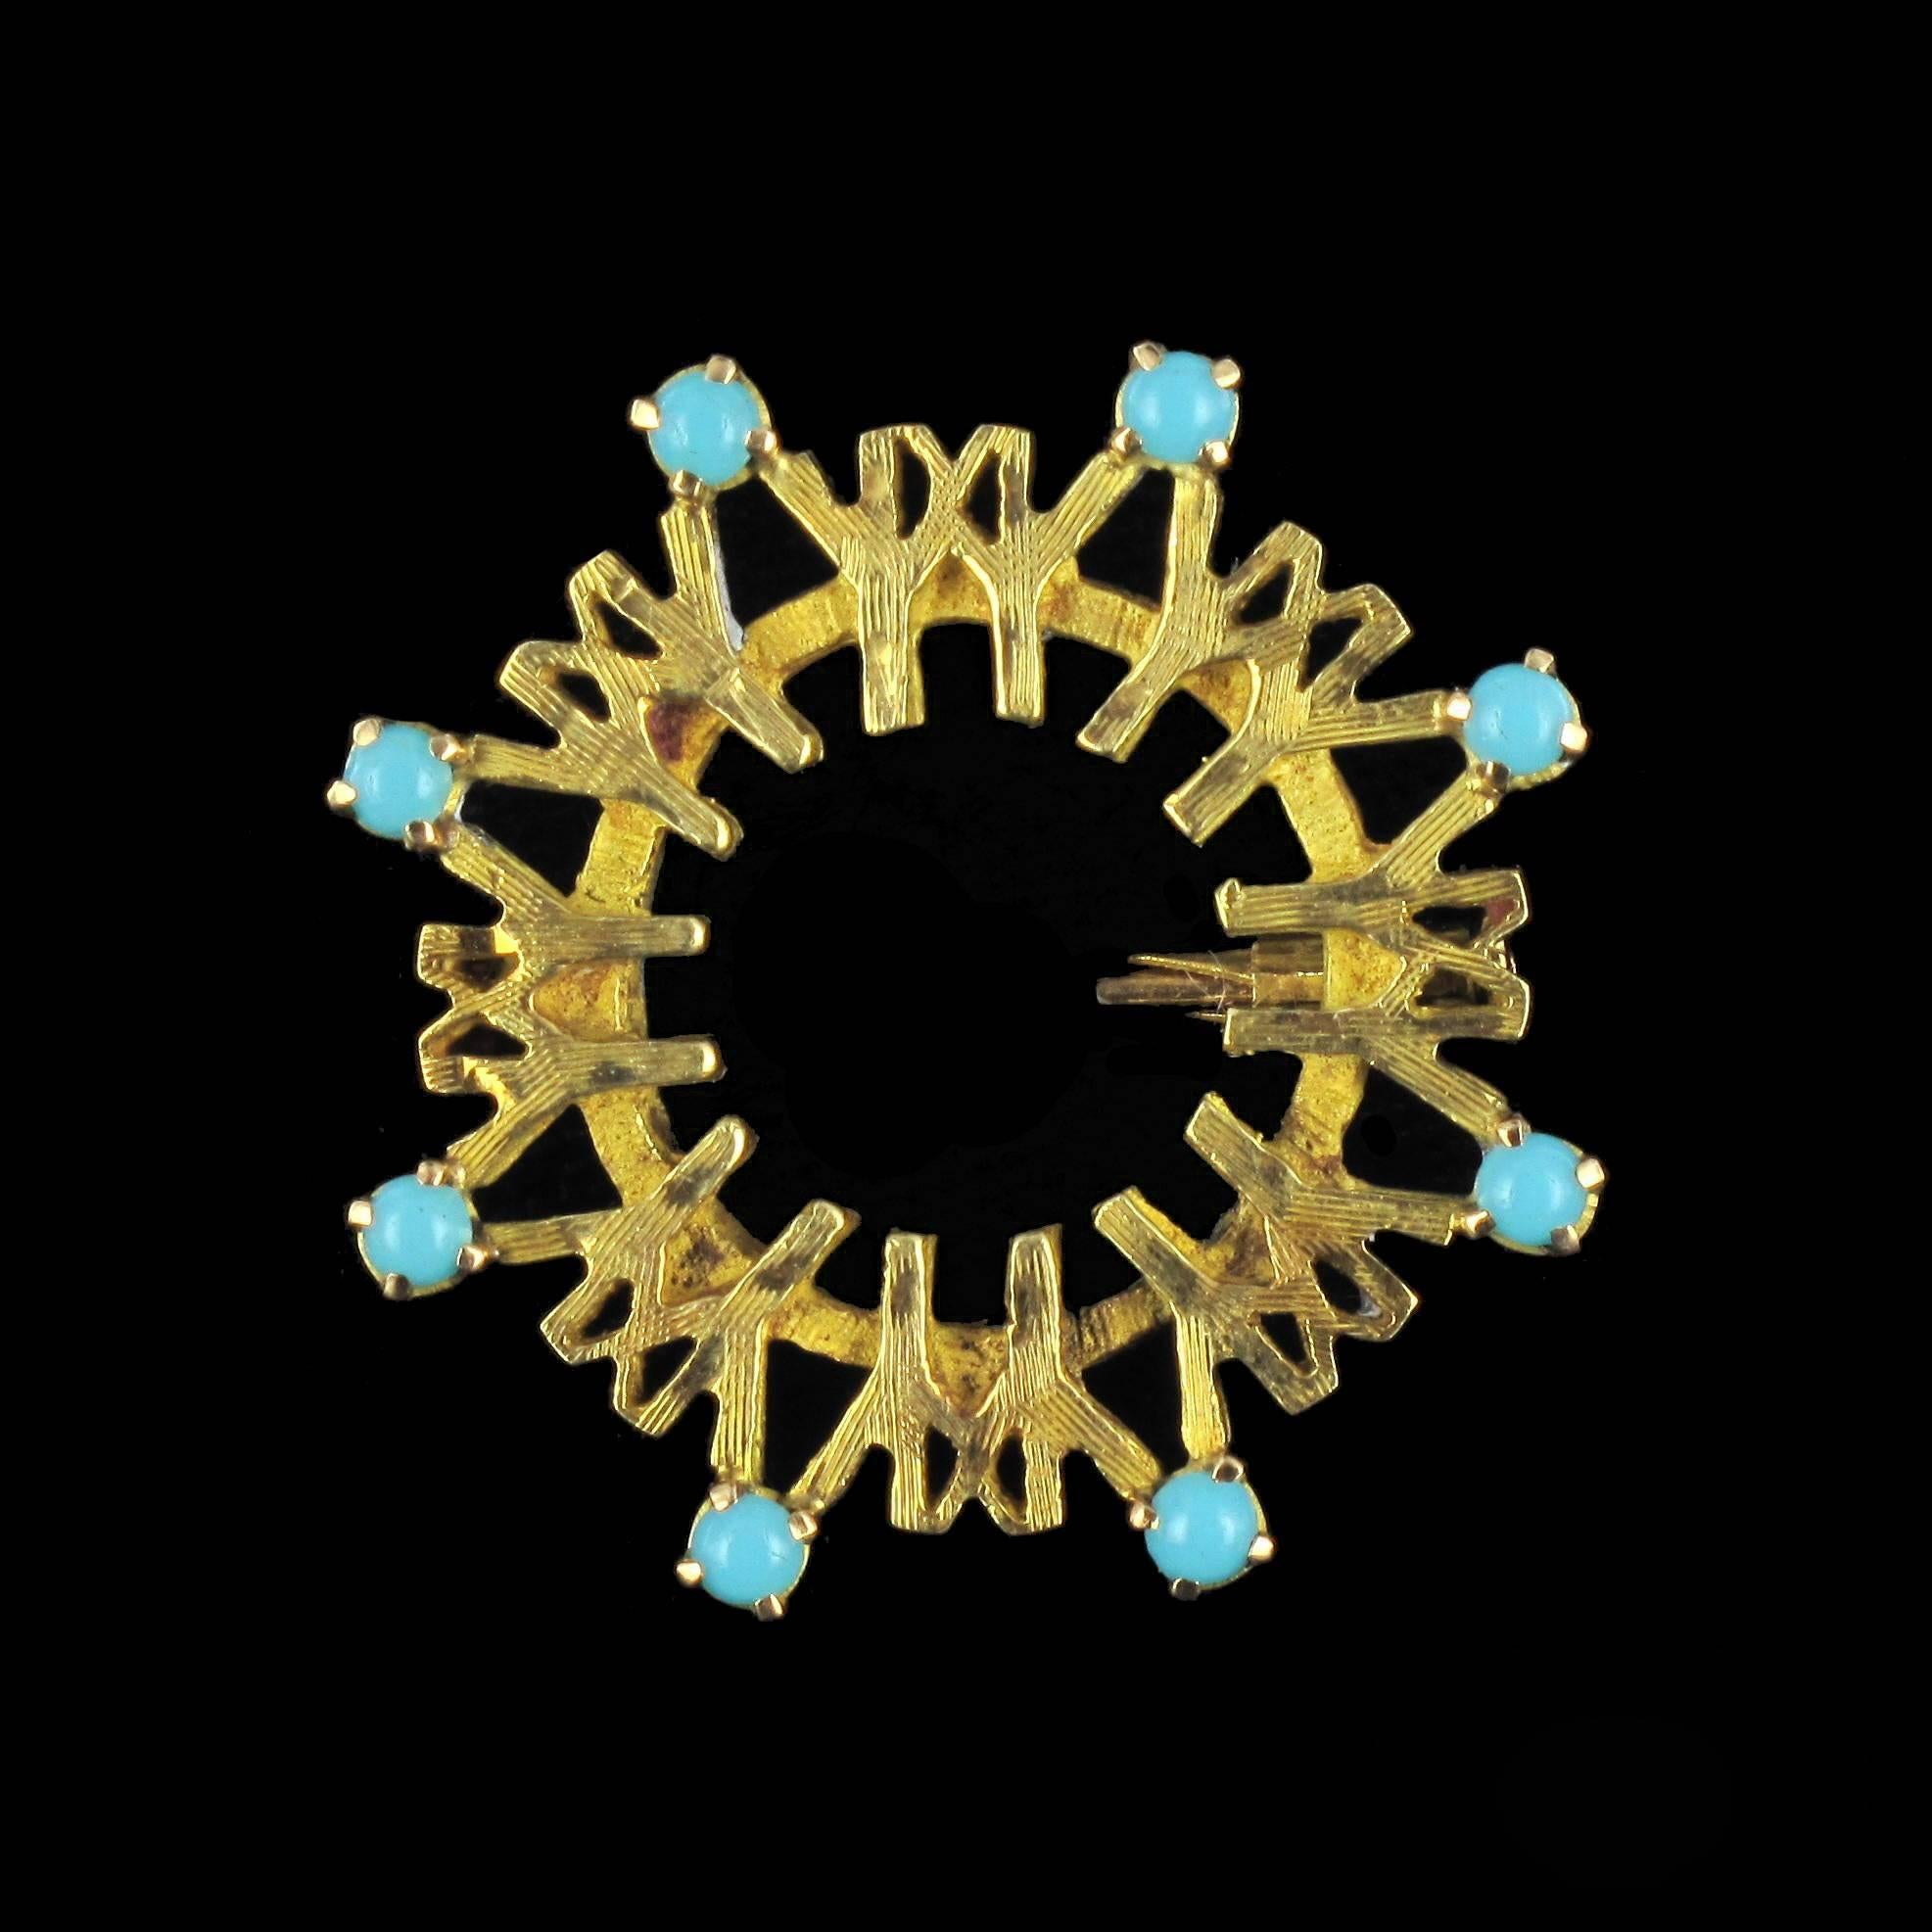 Cabochon 1967 Montreal Universal Exhibition Turquoise Gold Brooch